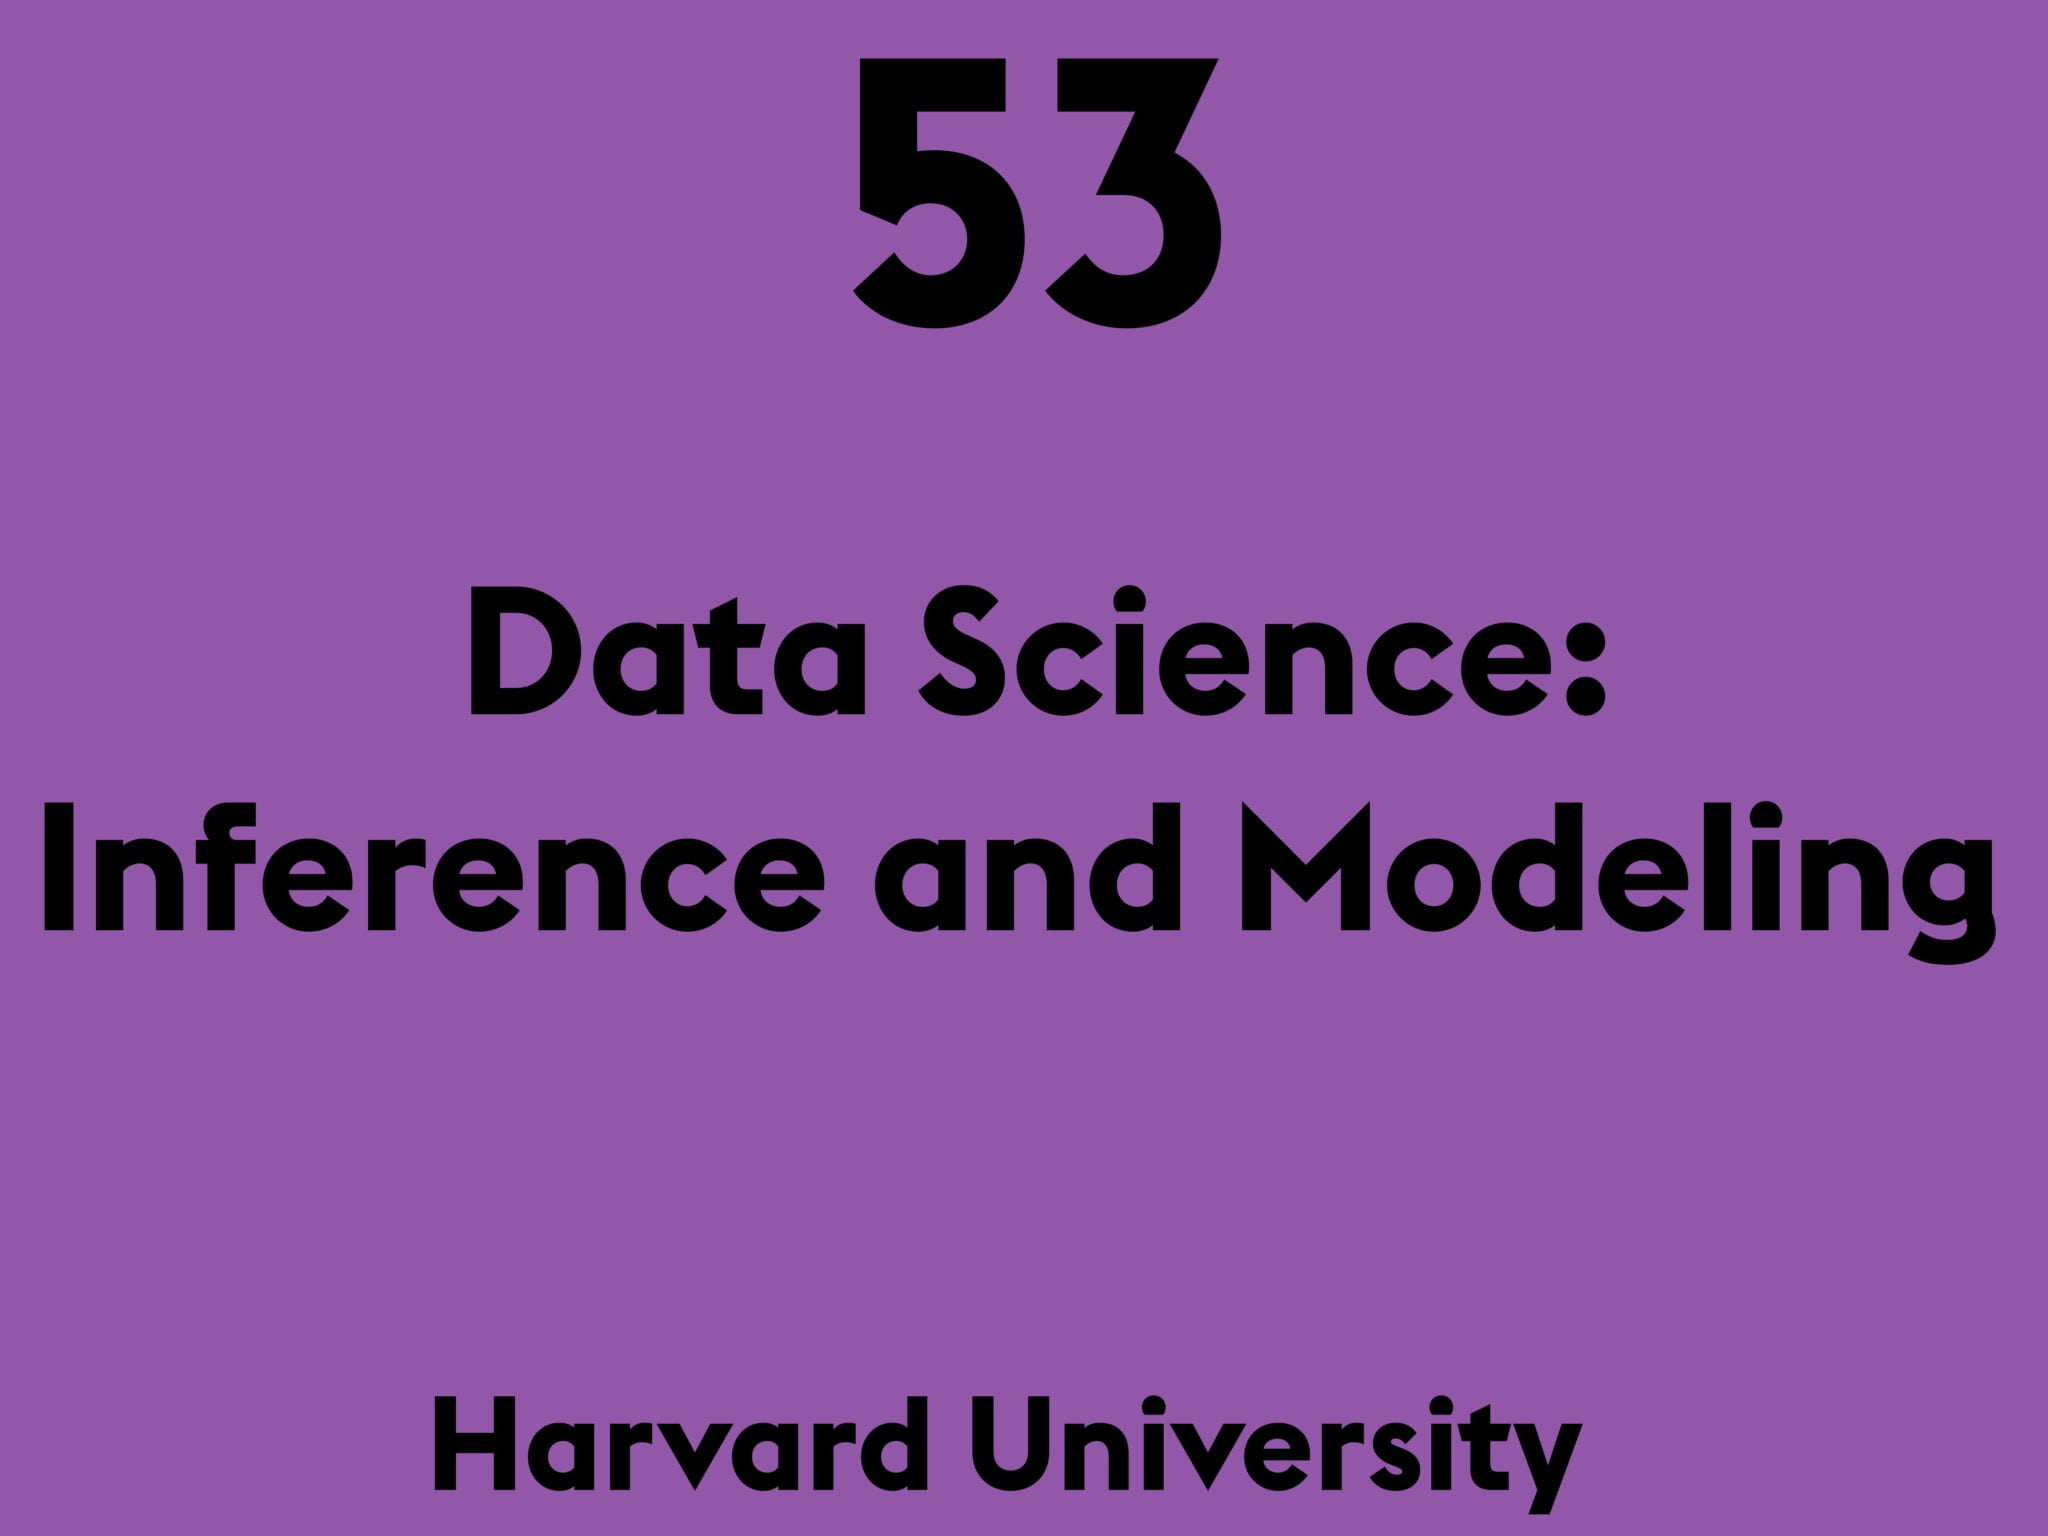 Data Science: Inference and Modeling